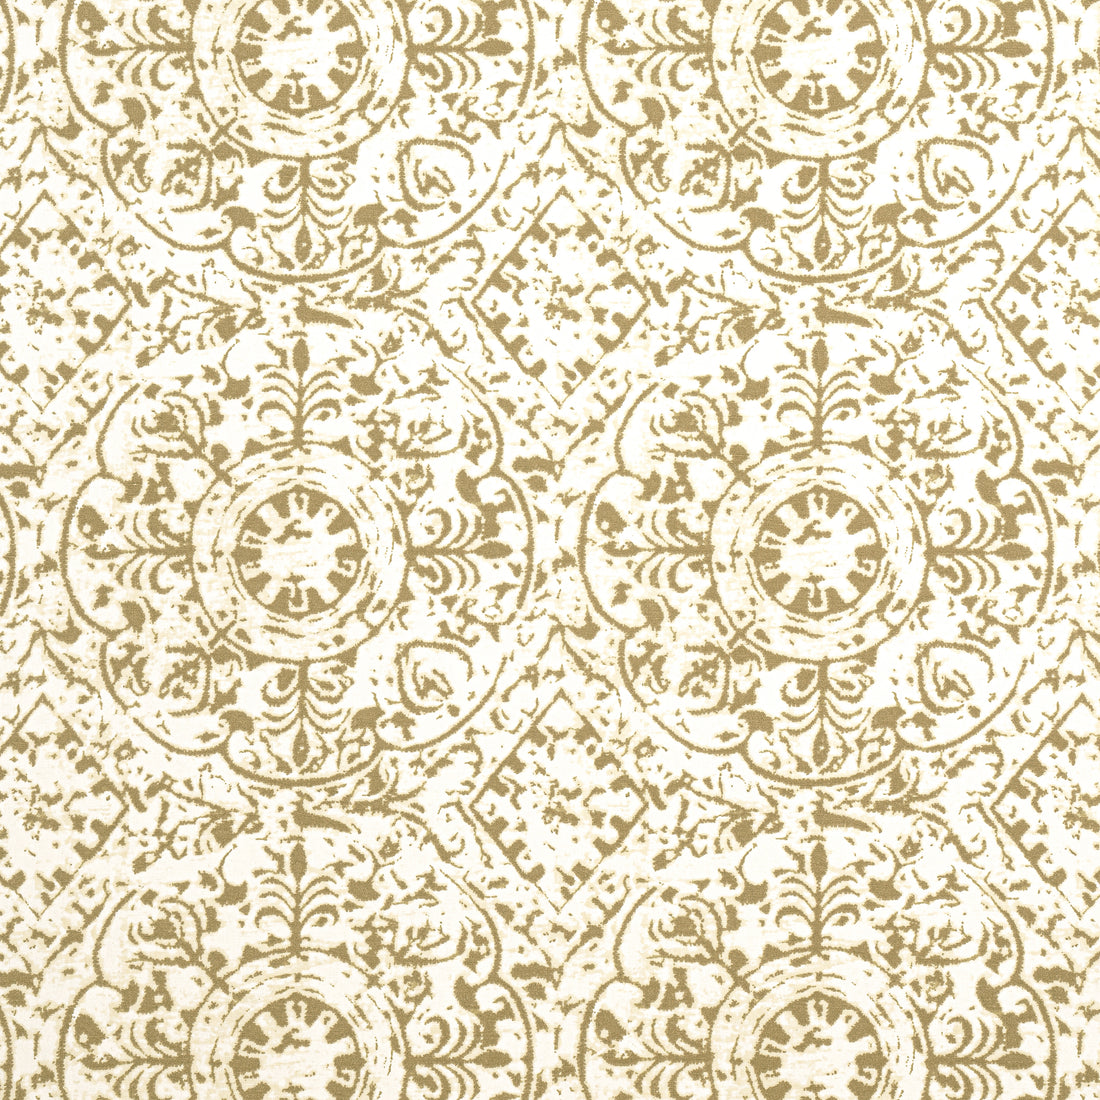 Havana fabric in camel color - pattern number F981313 - by Thibaut in the Montecito collection